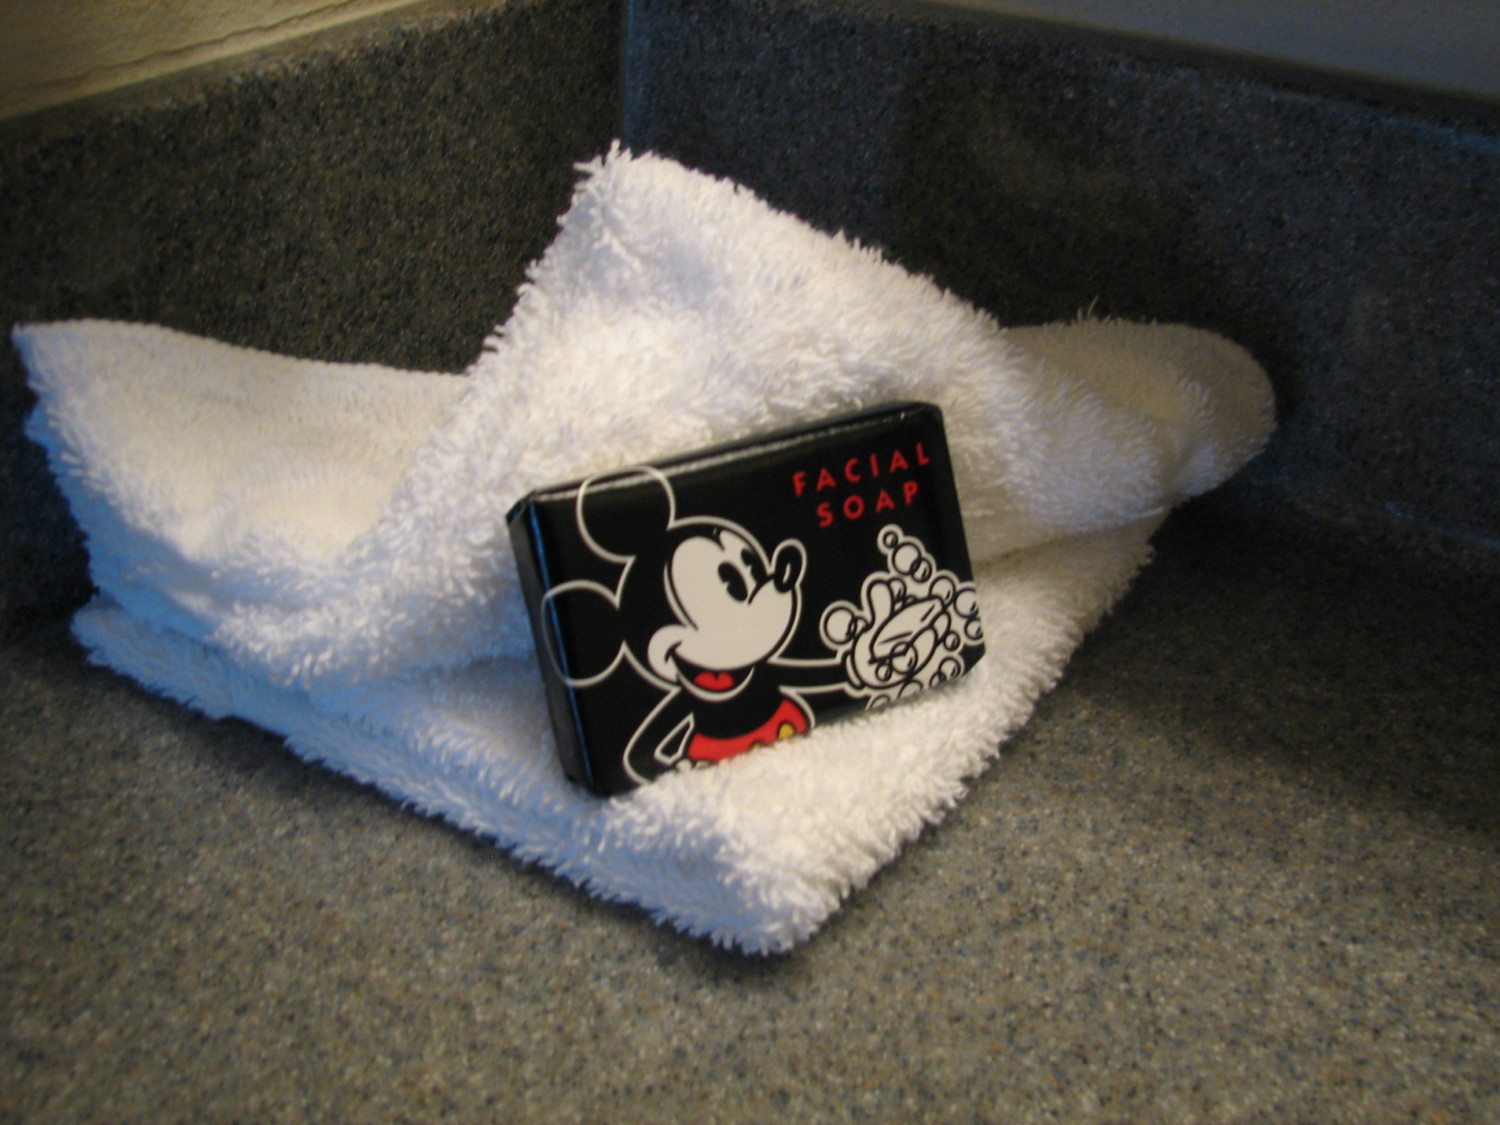 Even the soap has Mickey on it!